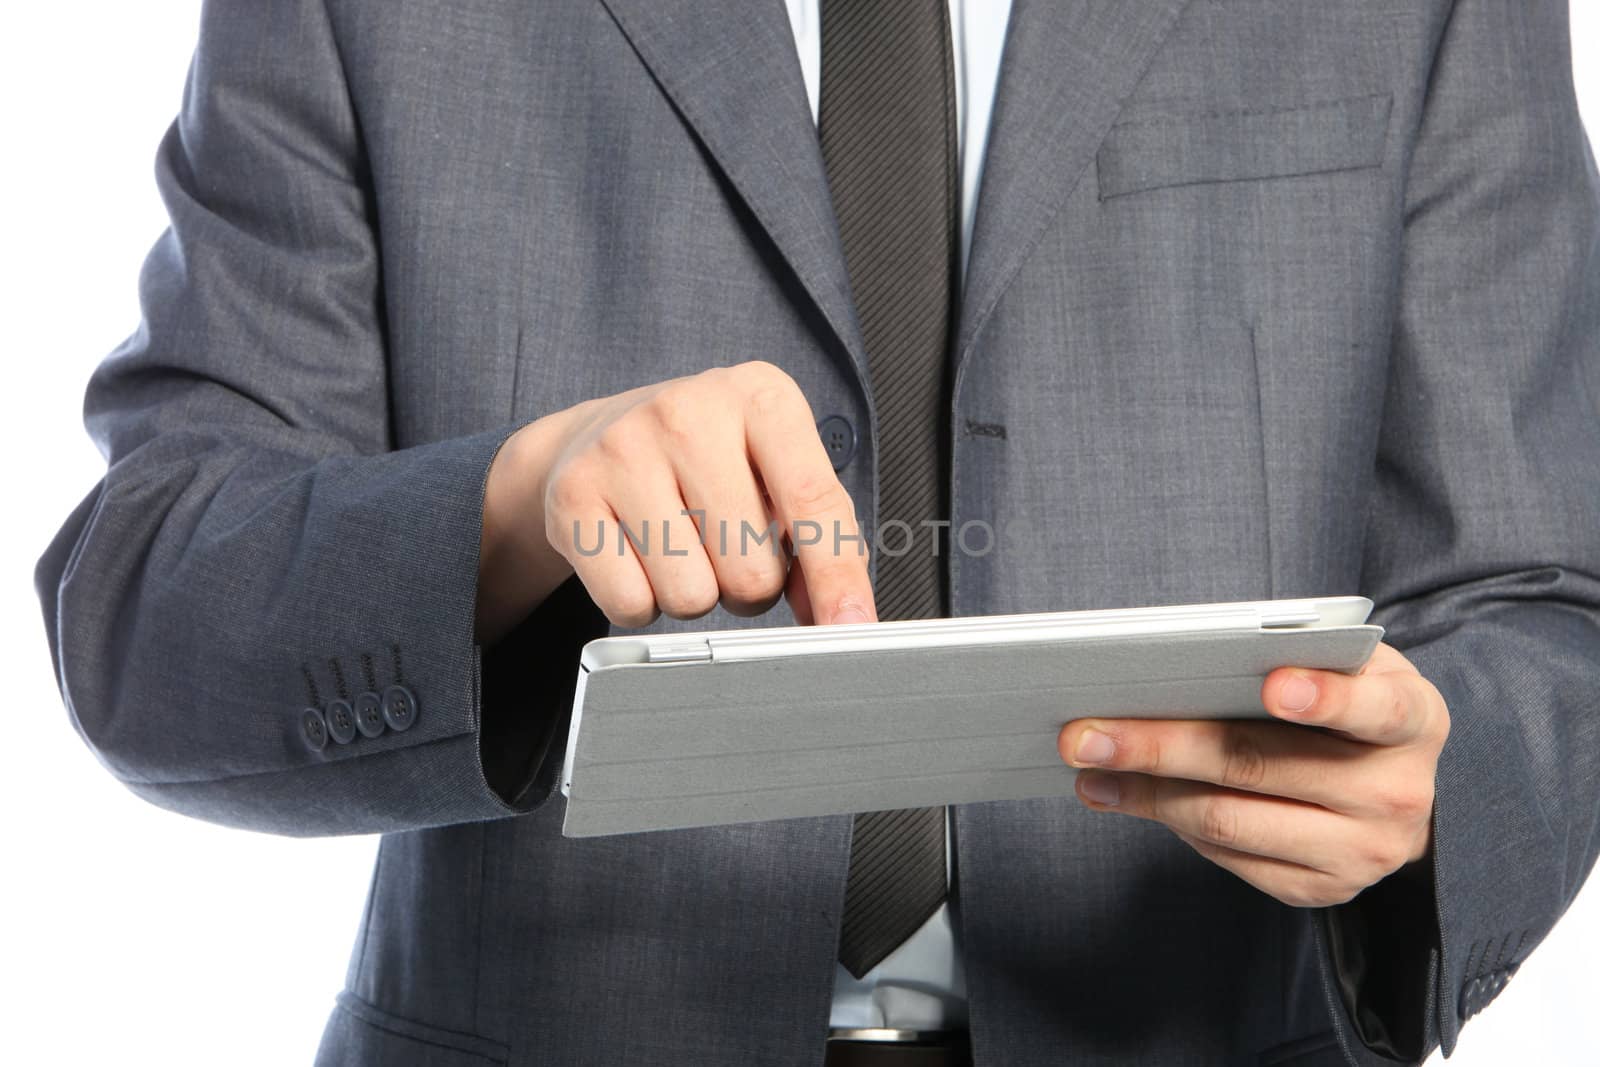 Torso of a businessman using a PC tablet by Farina6000